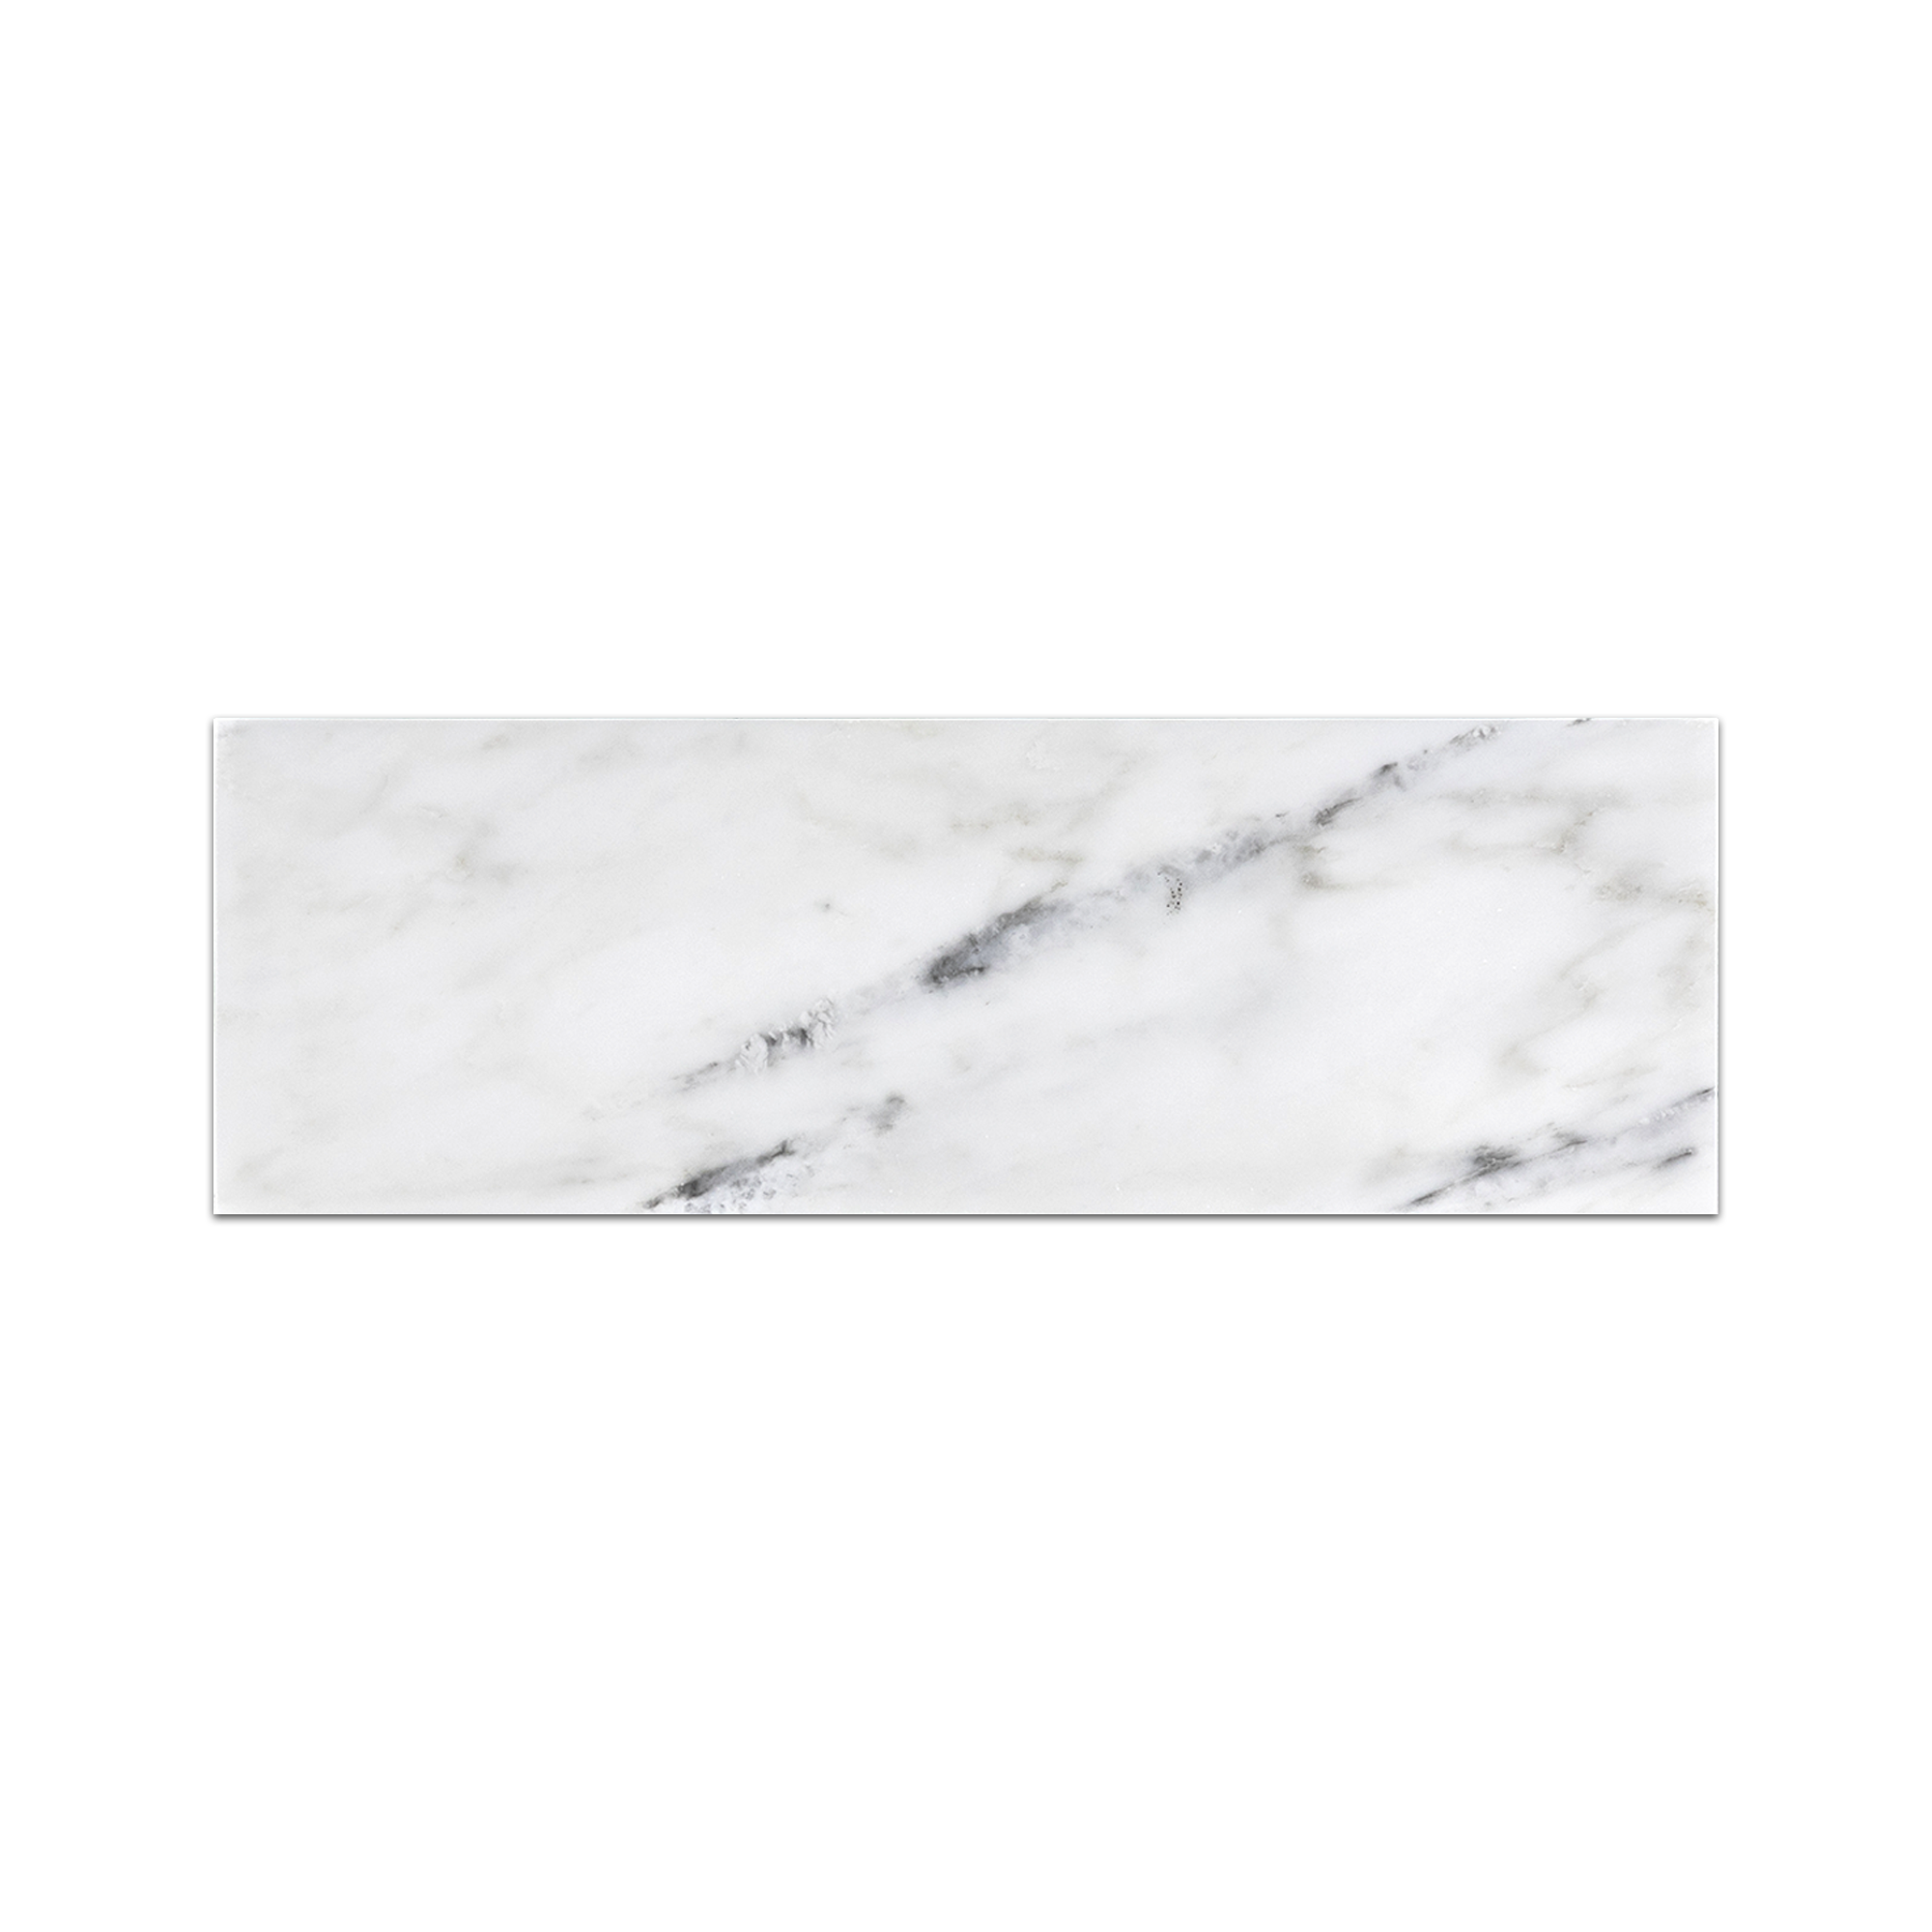 Elon Pearl White Marble Rectangle Field Tile 4x12x0.375 Polished AM8651P Surface Group International Product